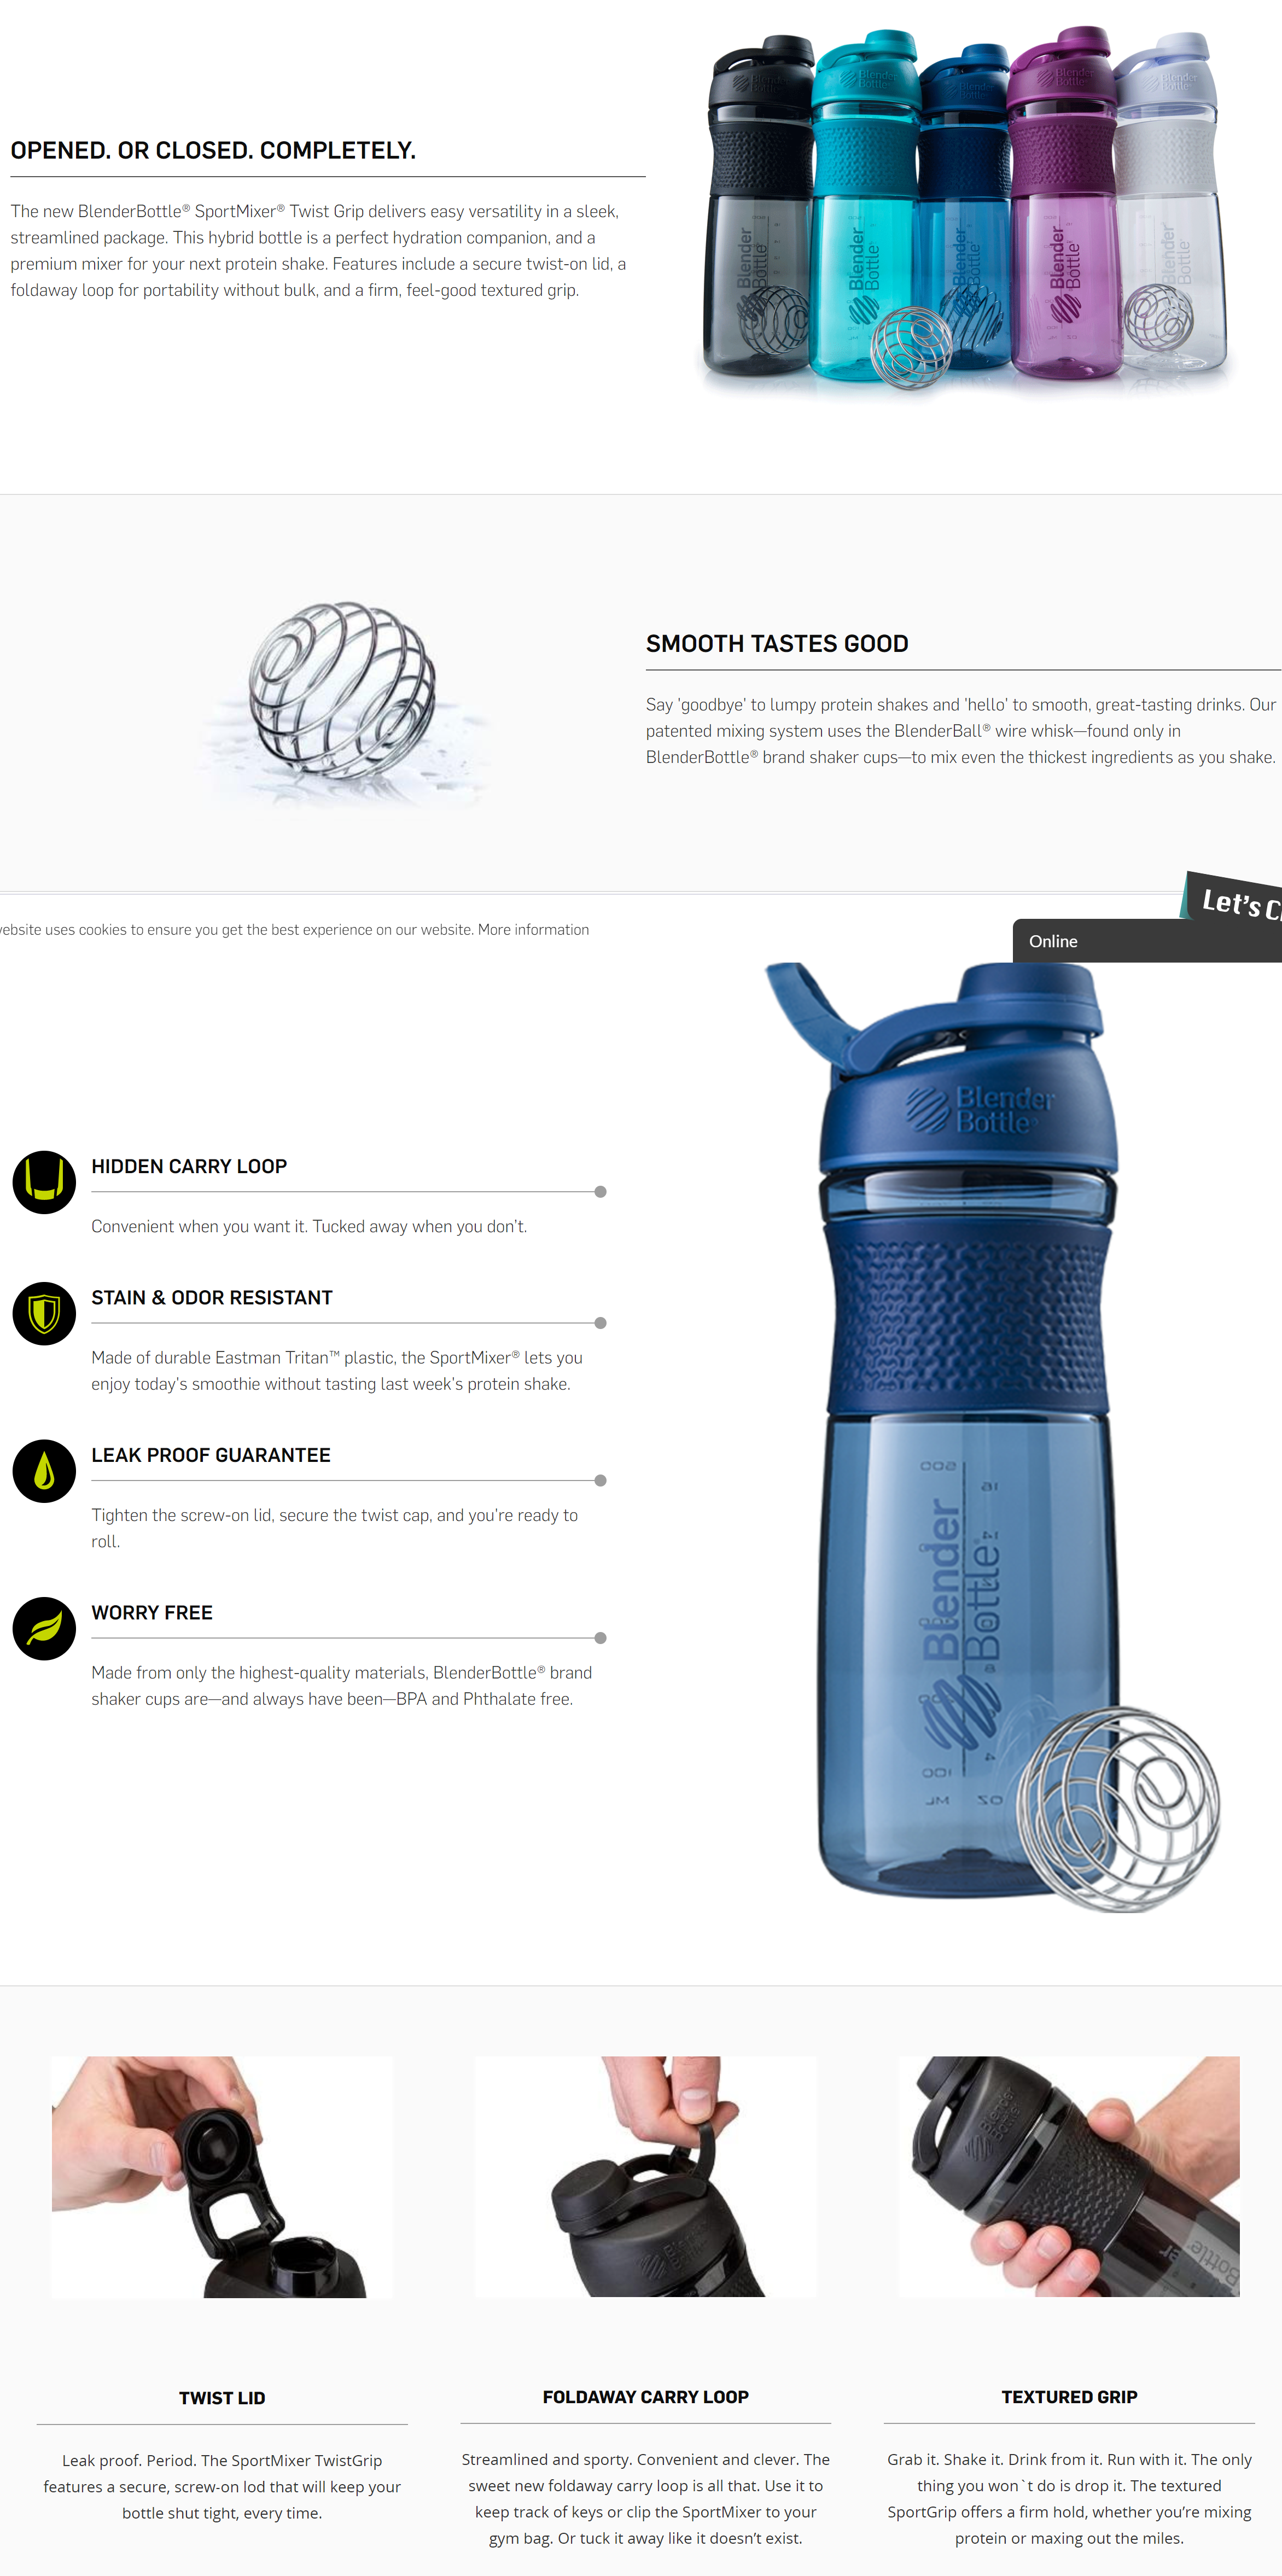 http://www.ifit.ee/media/ifit/product/BlenderBottle/Sportmixer-Twist-inf.png